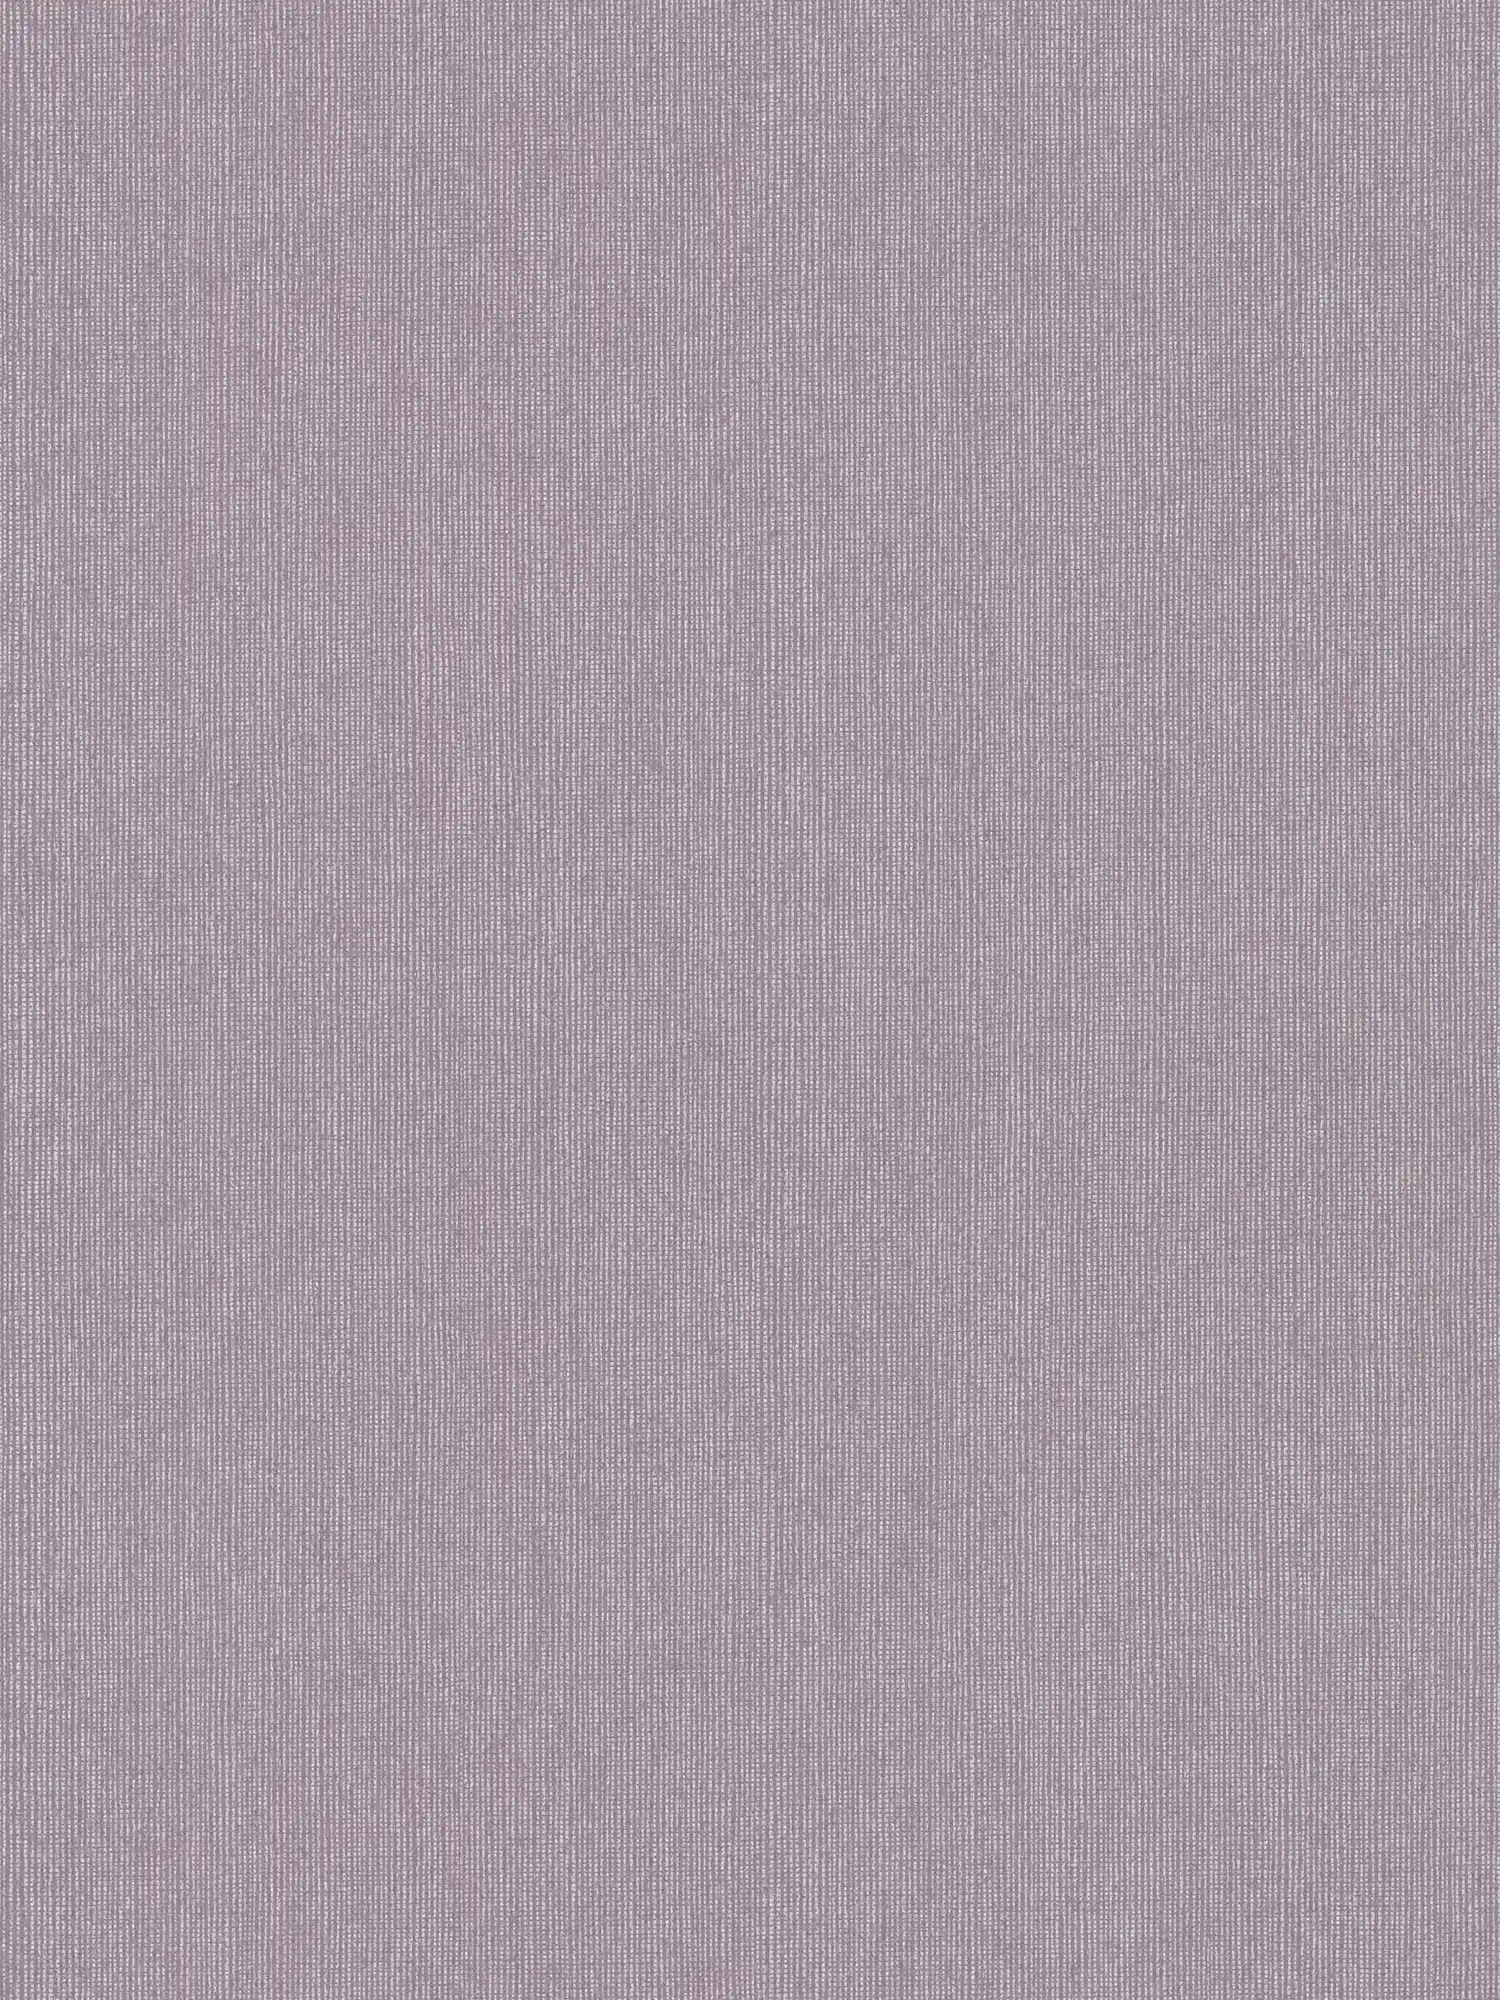 Gloss wallpaper with textile texture & shimmer effect - purple, grey
